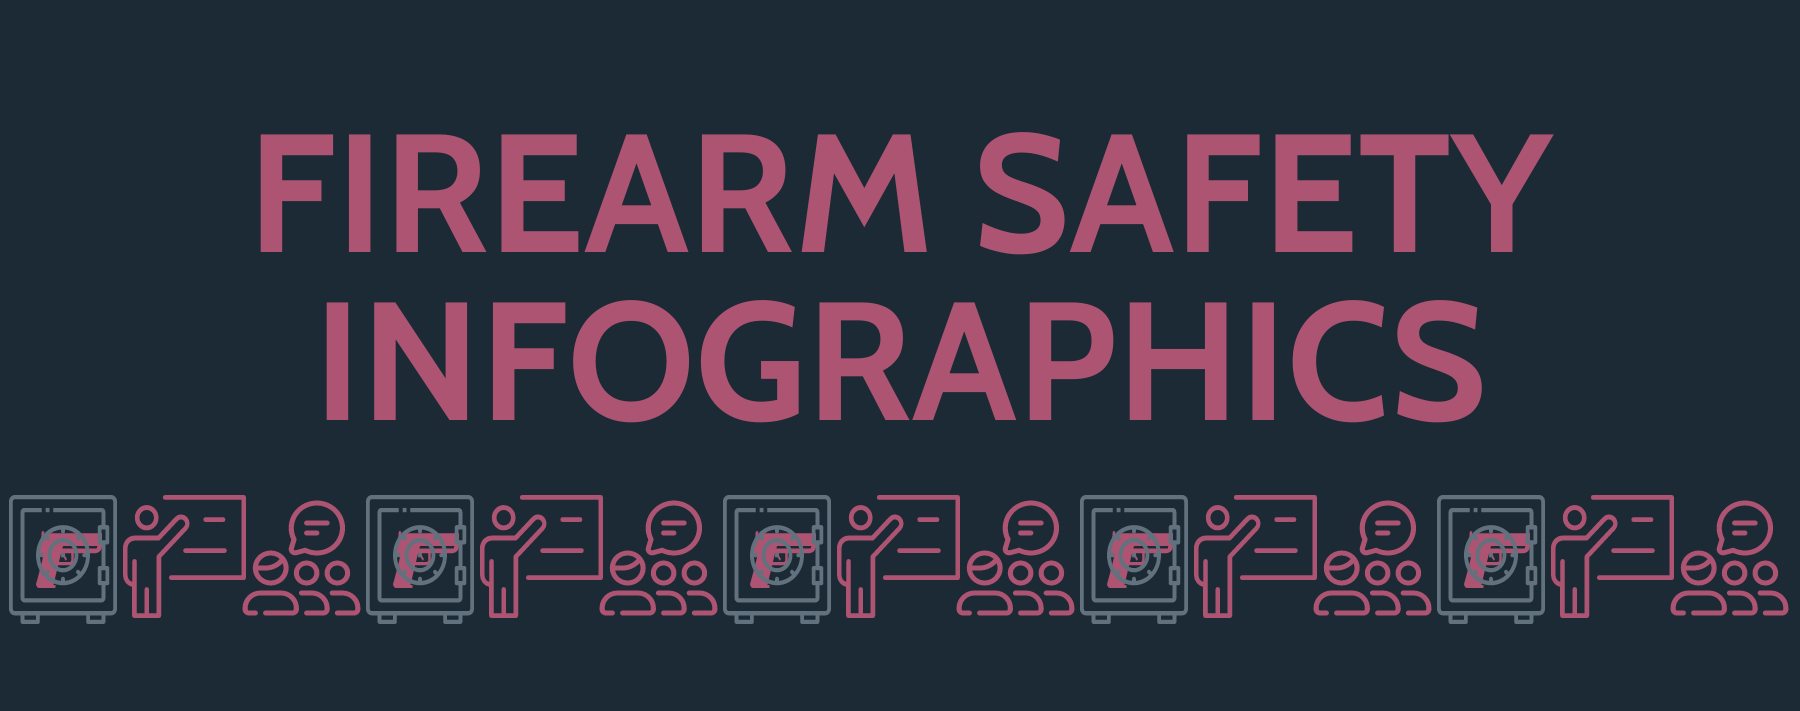 Firearm Safety Infographics 